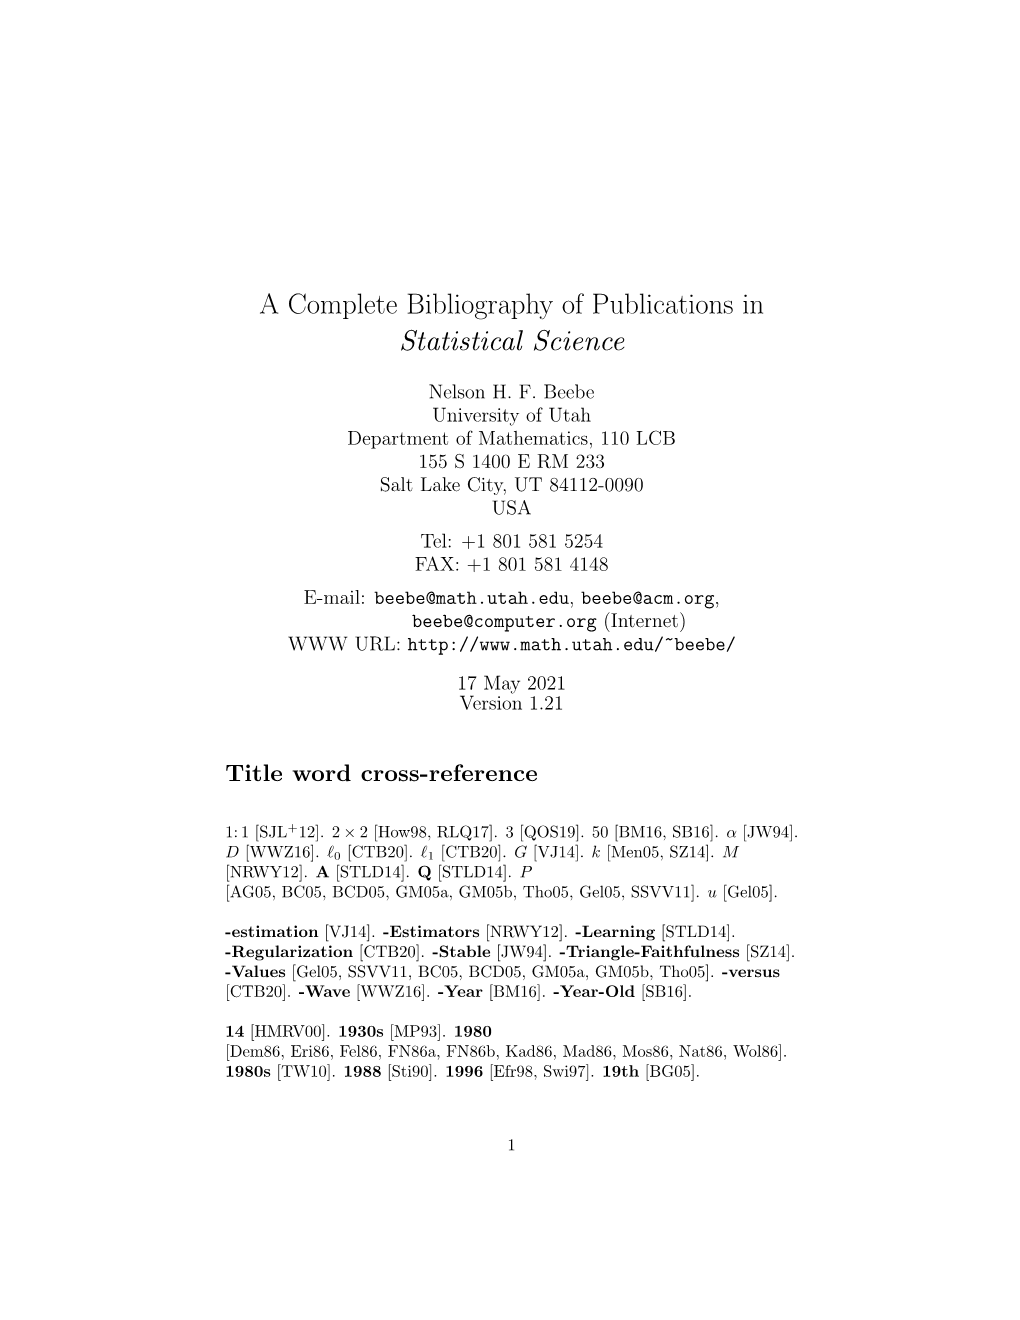 A Complete Bibliography of Publications in Statistical Science